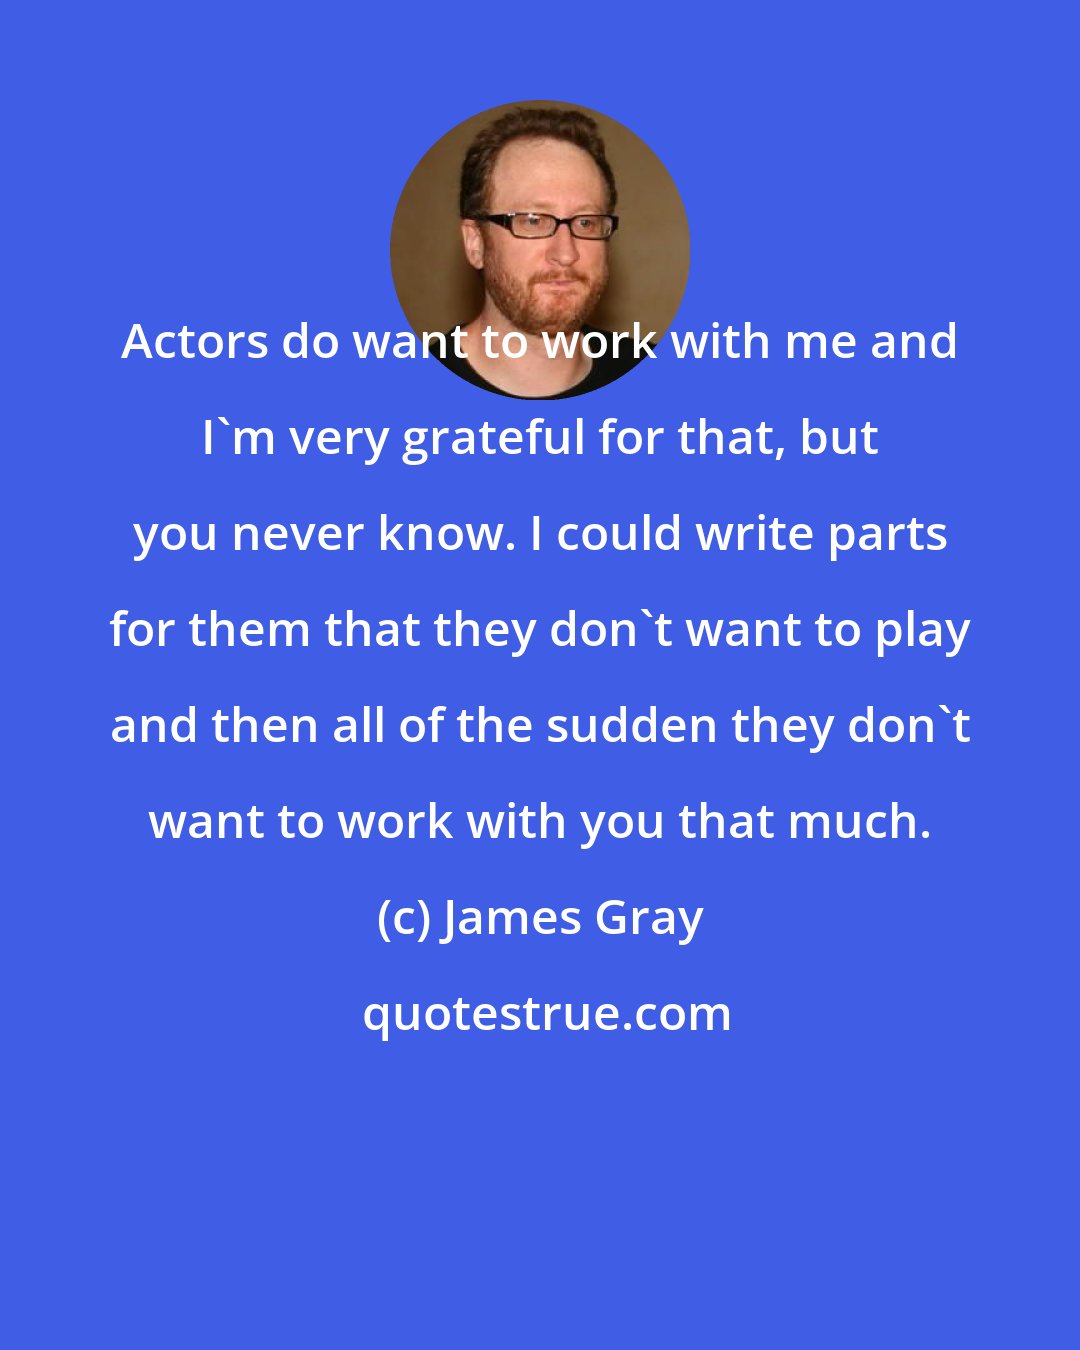 James Gray: Actors do want to work with me and I'm very grateful for that, but you never know. I could write parts for them that they don't want to play and then all of the sudden they don't want to work with you that much.